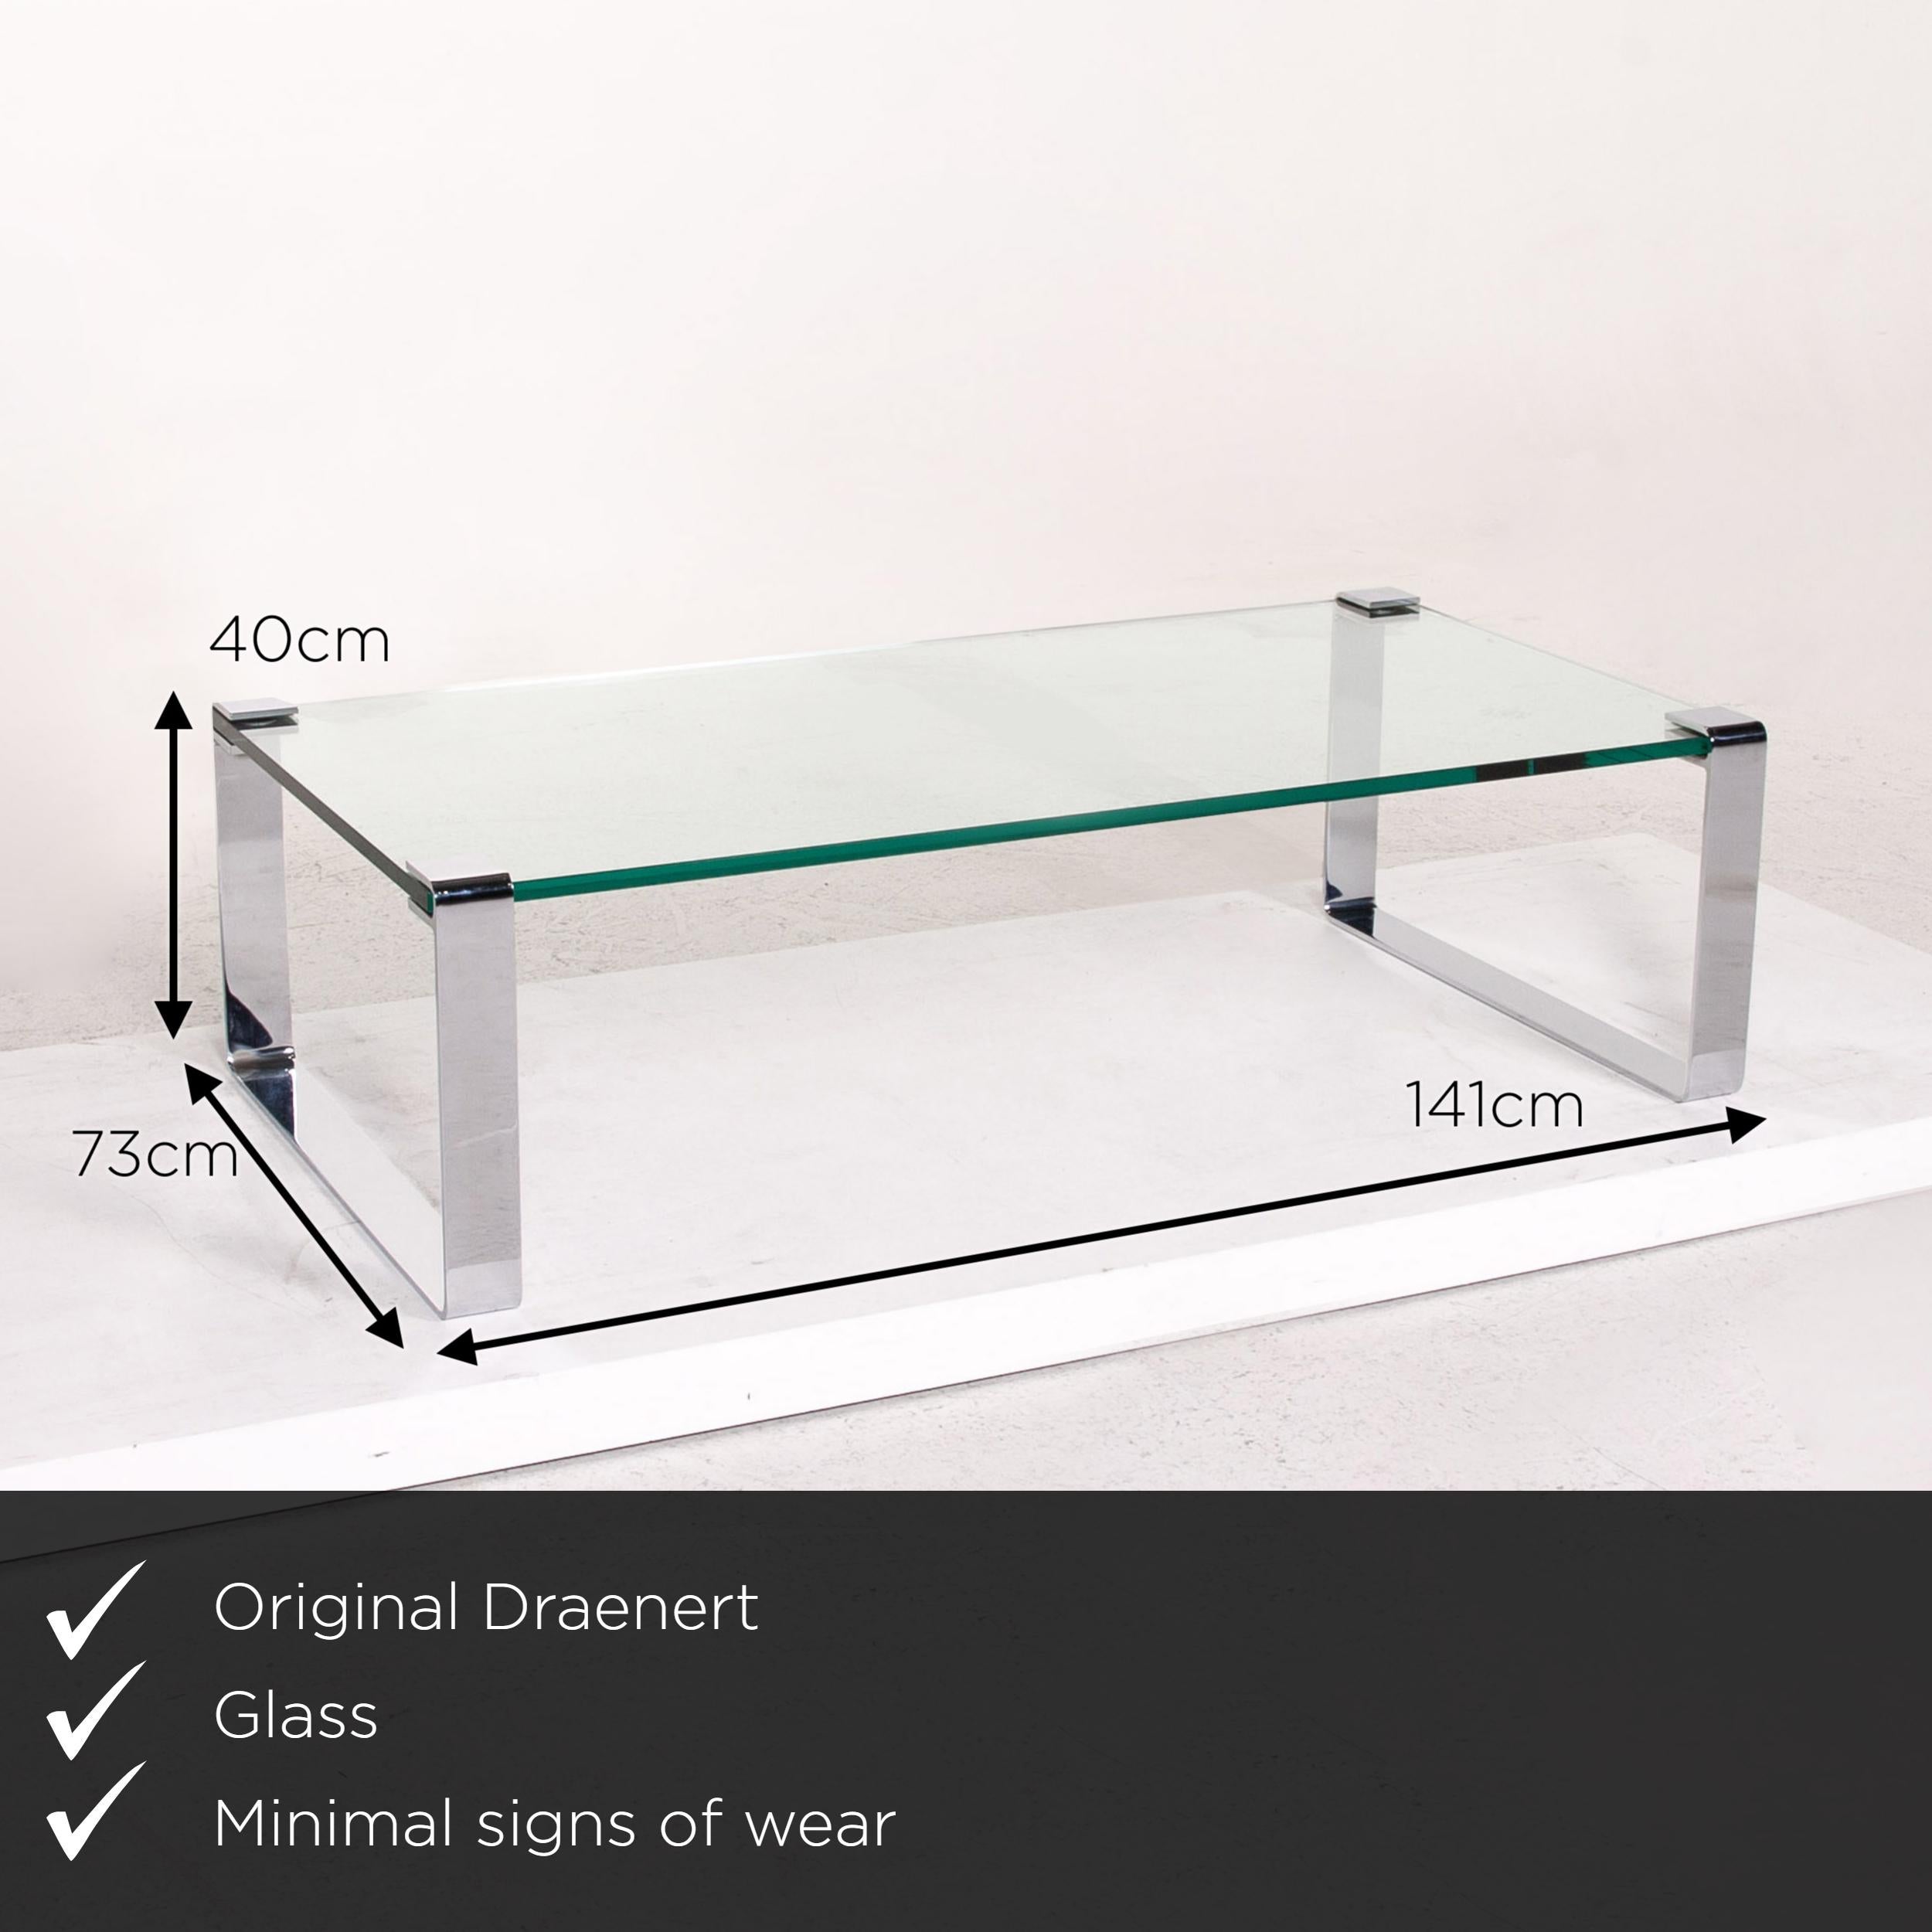 We present to you a Draenert glass coffee table metal table.

 

 Product measurements in centimeters:
 

 Depth 73
Width 141
Height 40.




     